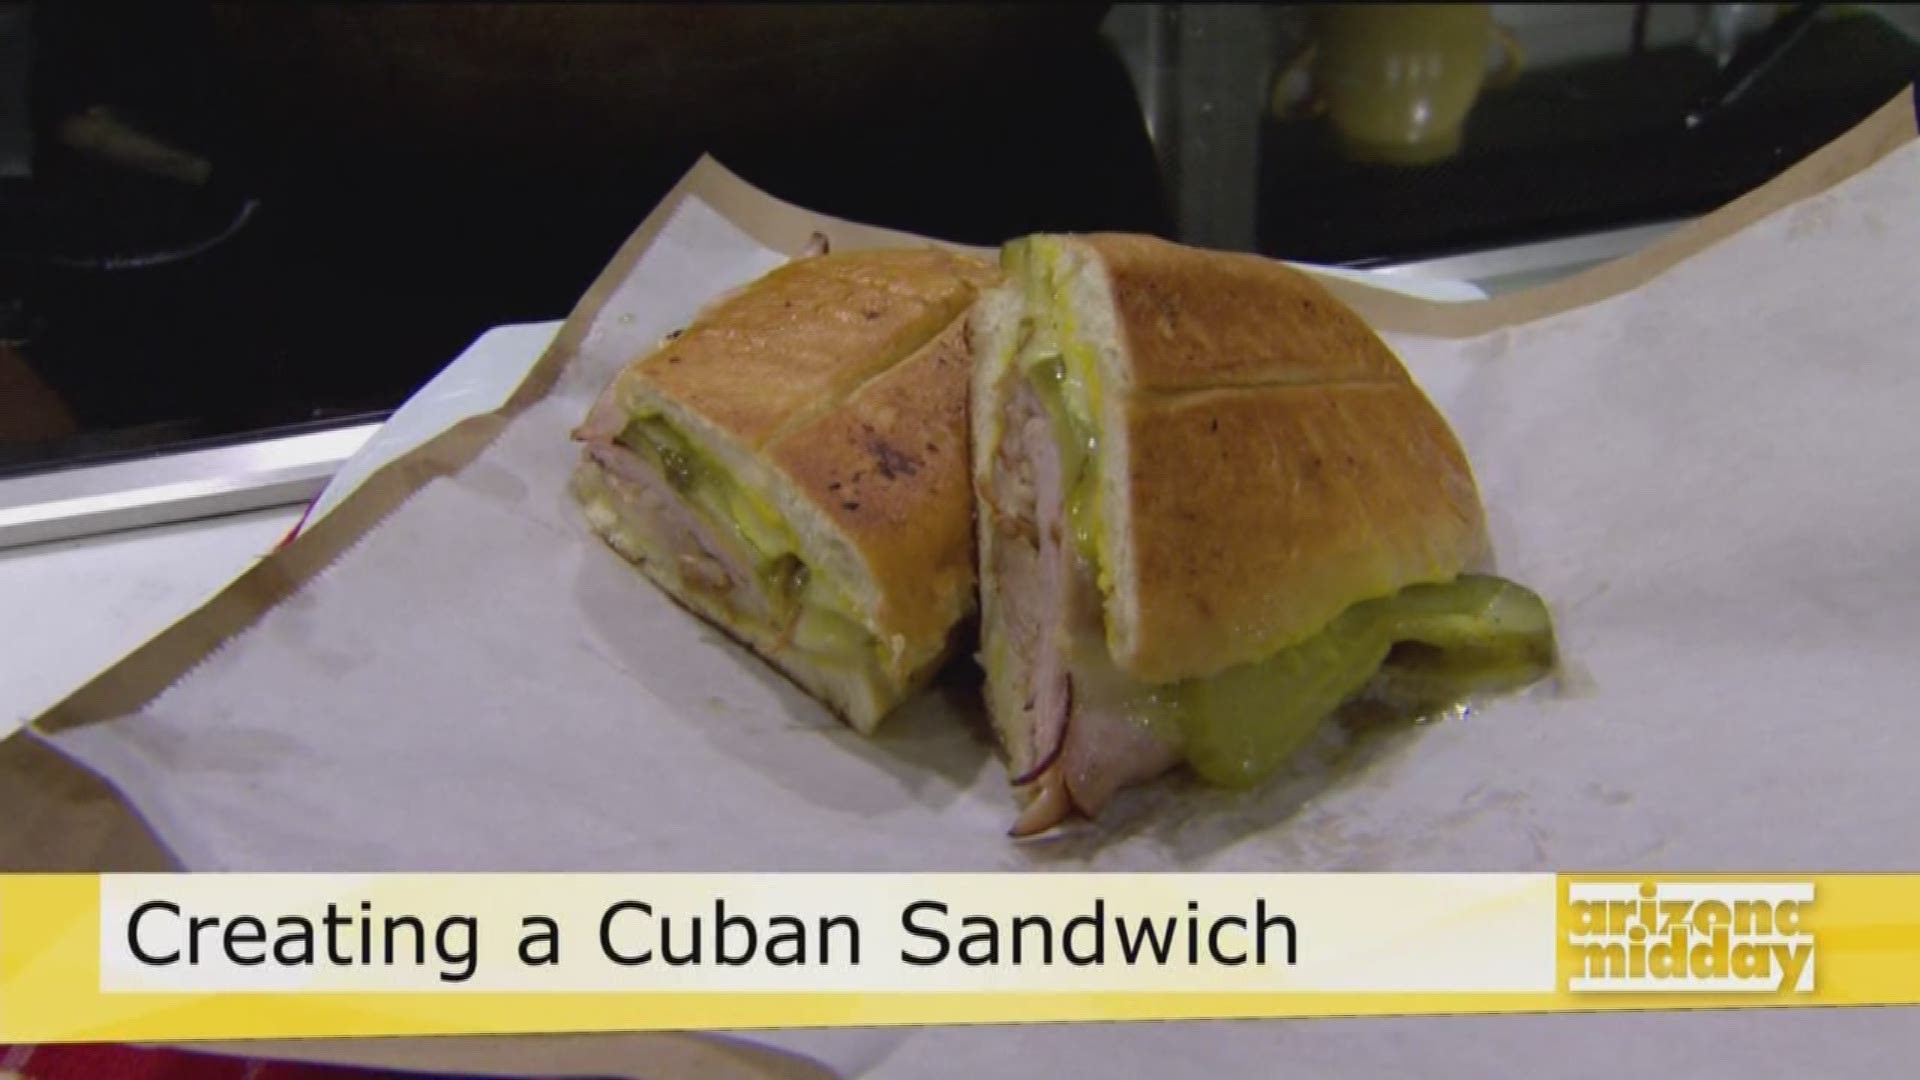 Jan shows us how to make a quick and easy lunch time favorite, a Cuban sandwich.